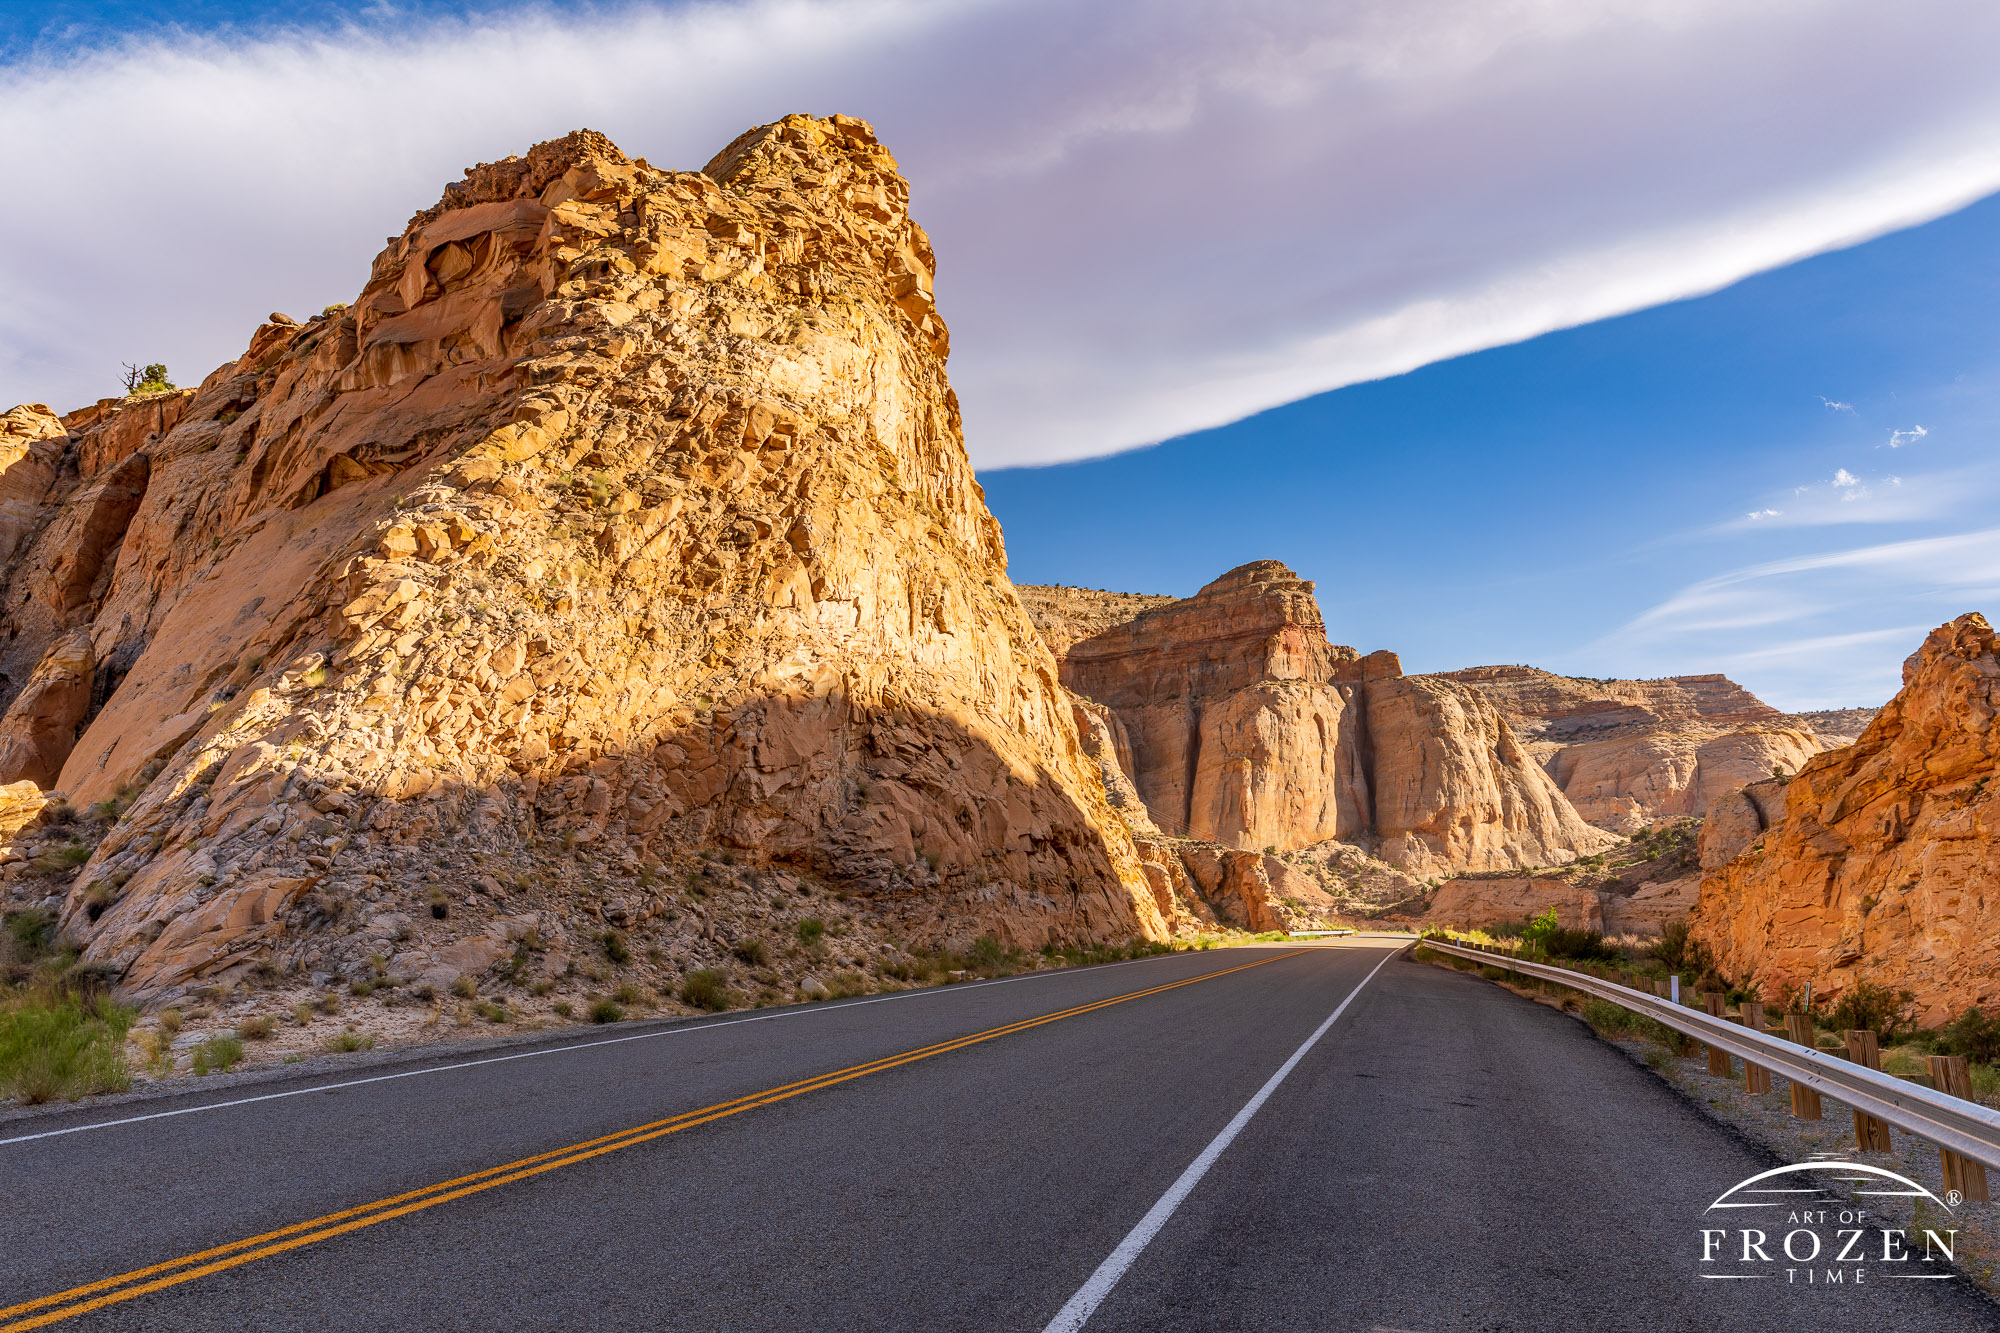 A road cut through white Navajo Sandstone layers was Utah Scenic Byway 24 winds through Capitol Reef National Park